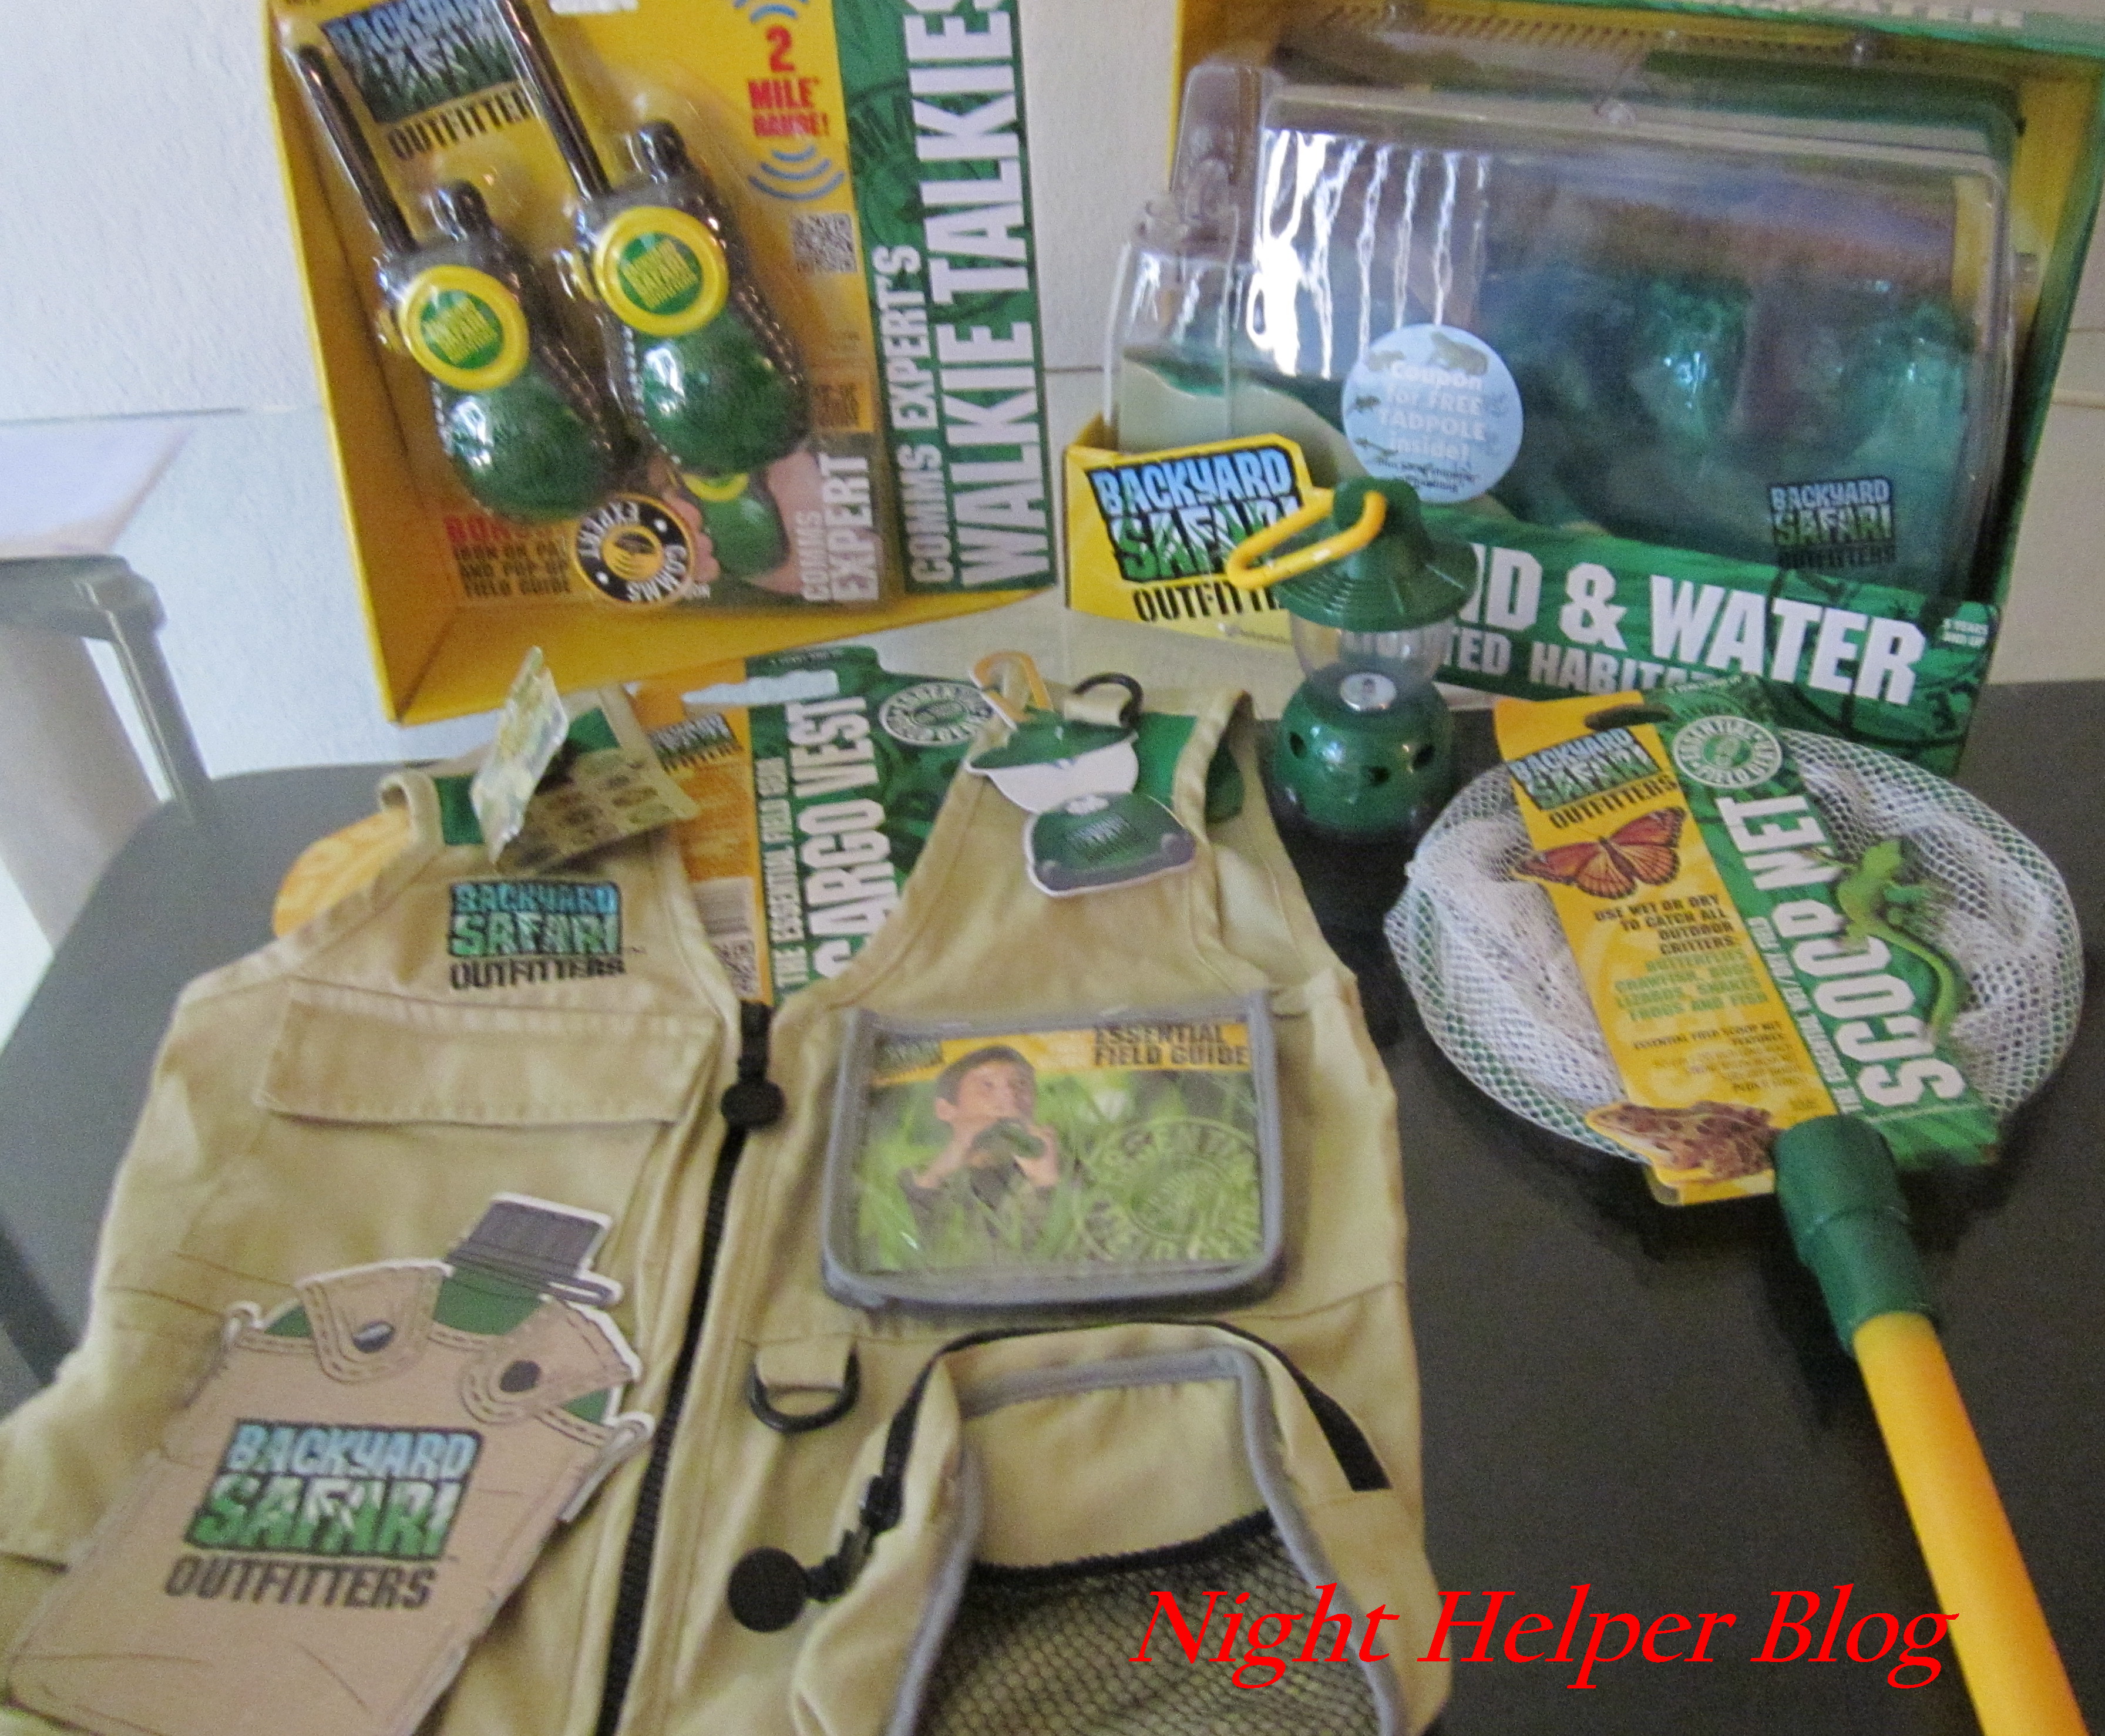 Its a Fun BackYard Safari OutFitters Giveaway, just for ...